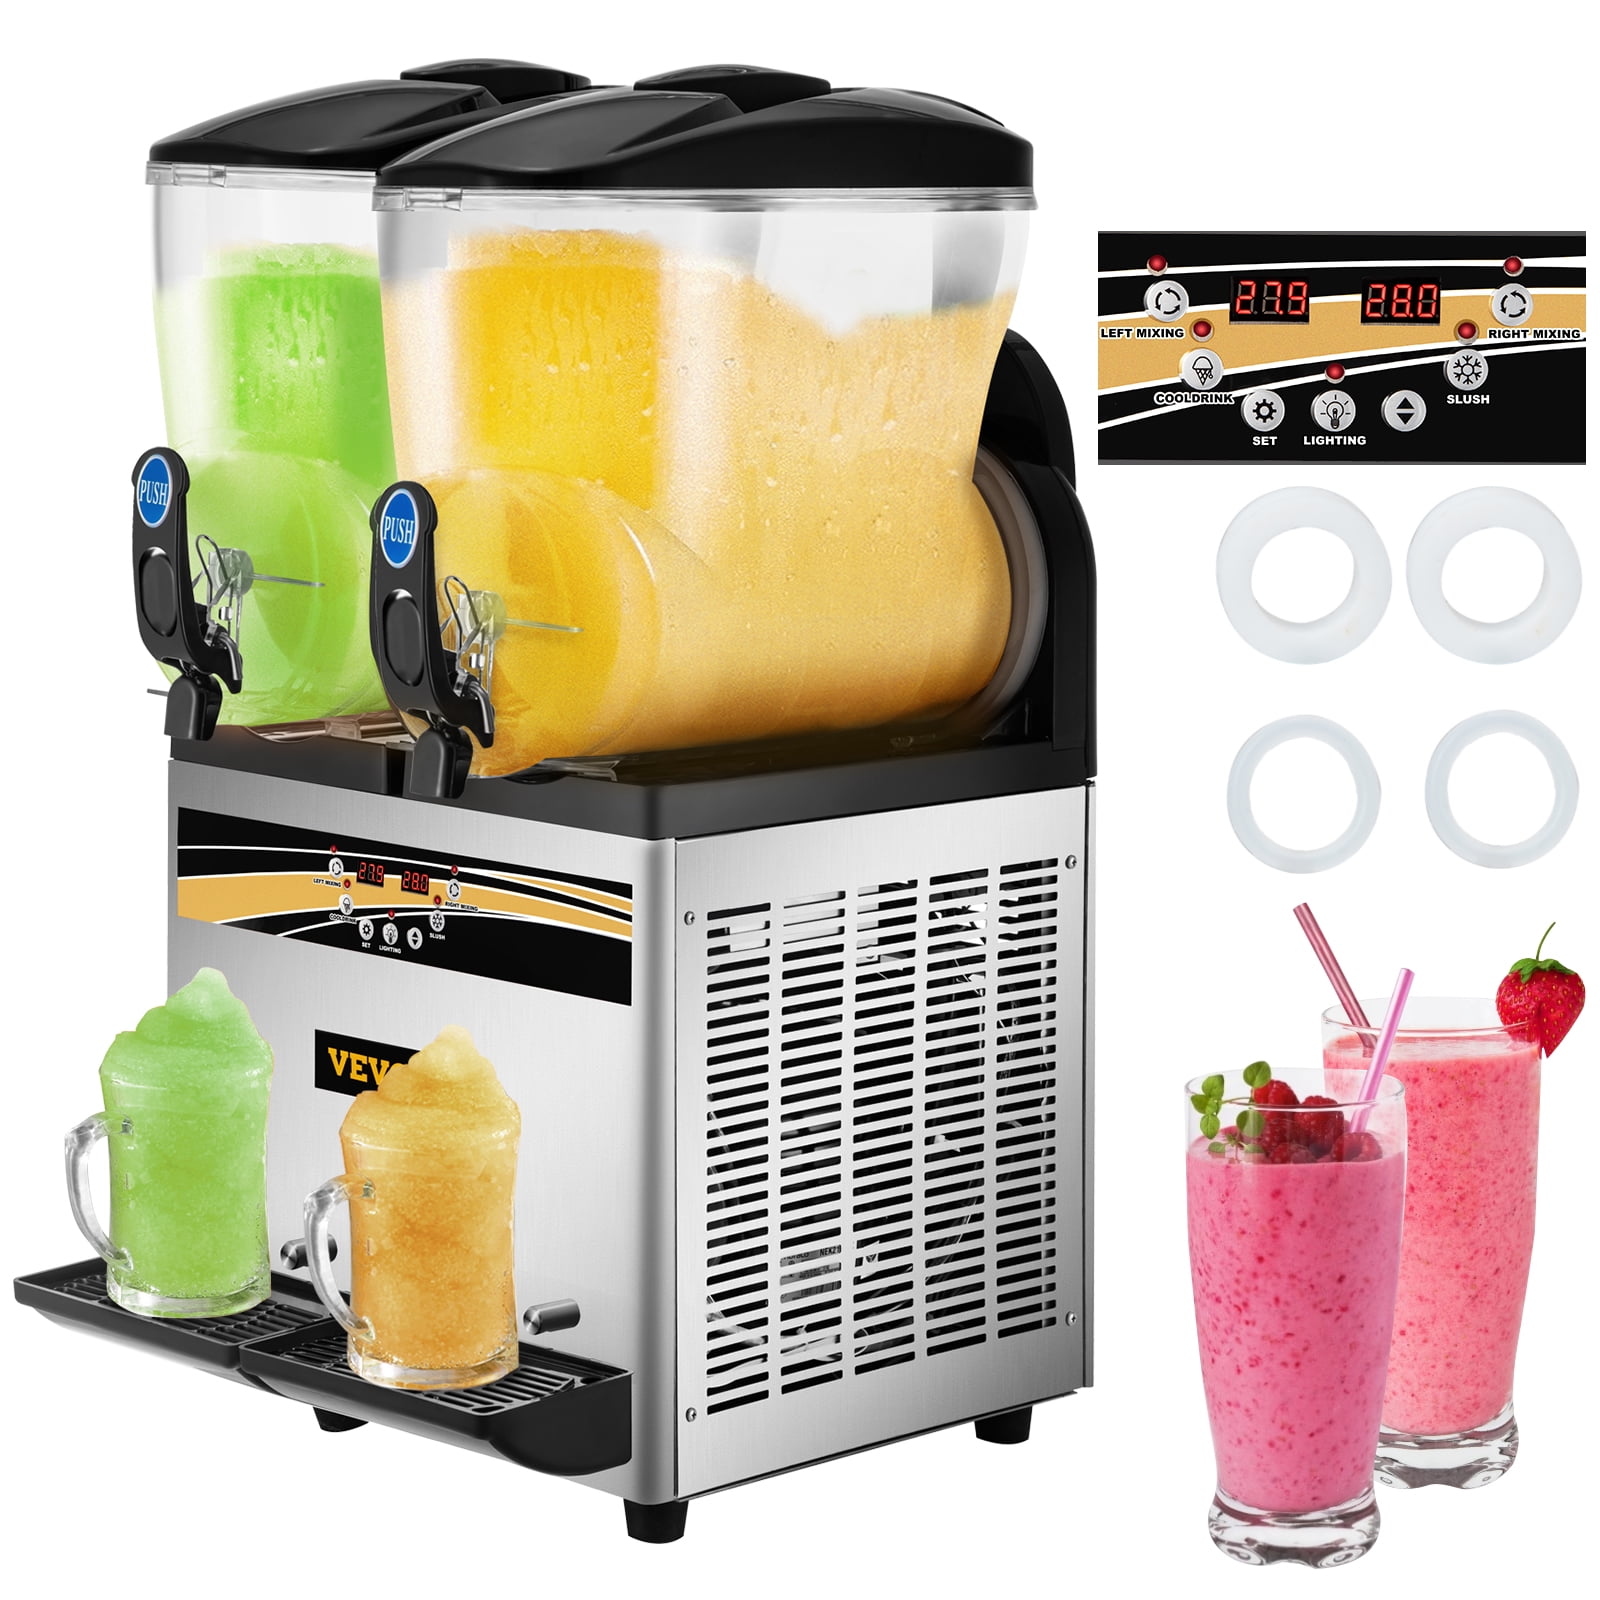 Nostalgia Frozen Drink Maker and Margarita Machine for Home - 32-Ounce  Slushy Maker with Stainless Steel Flow Spout - Easy to Clean and Double